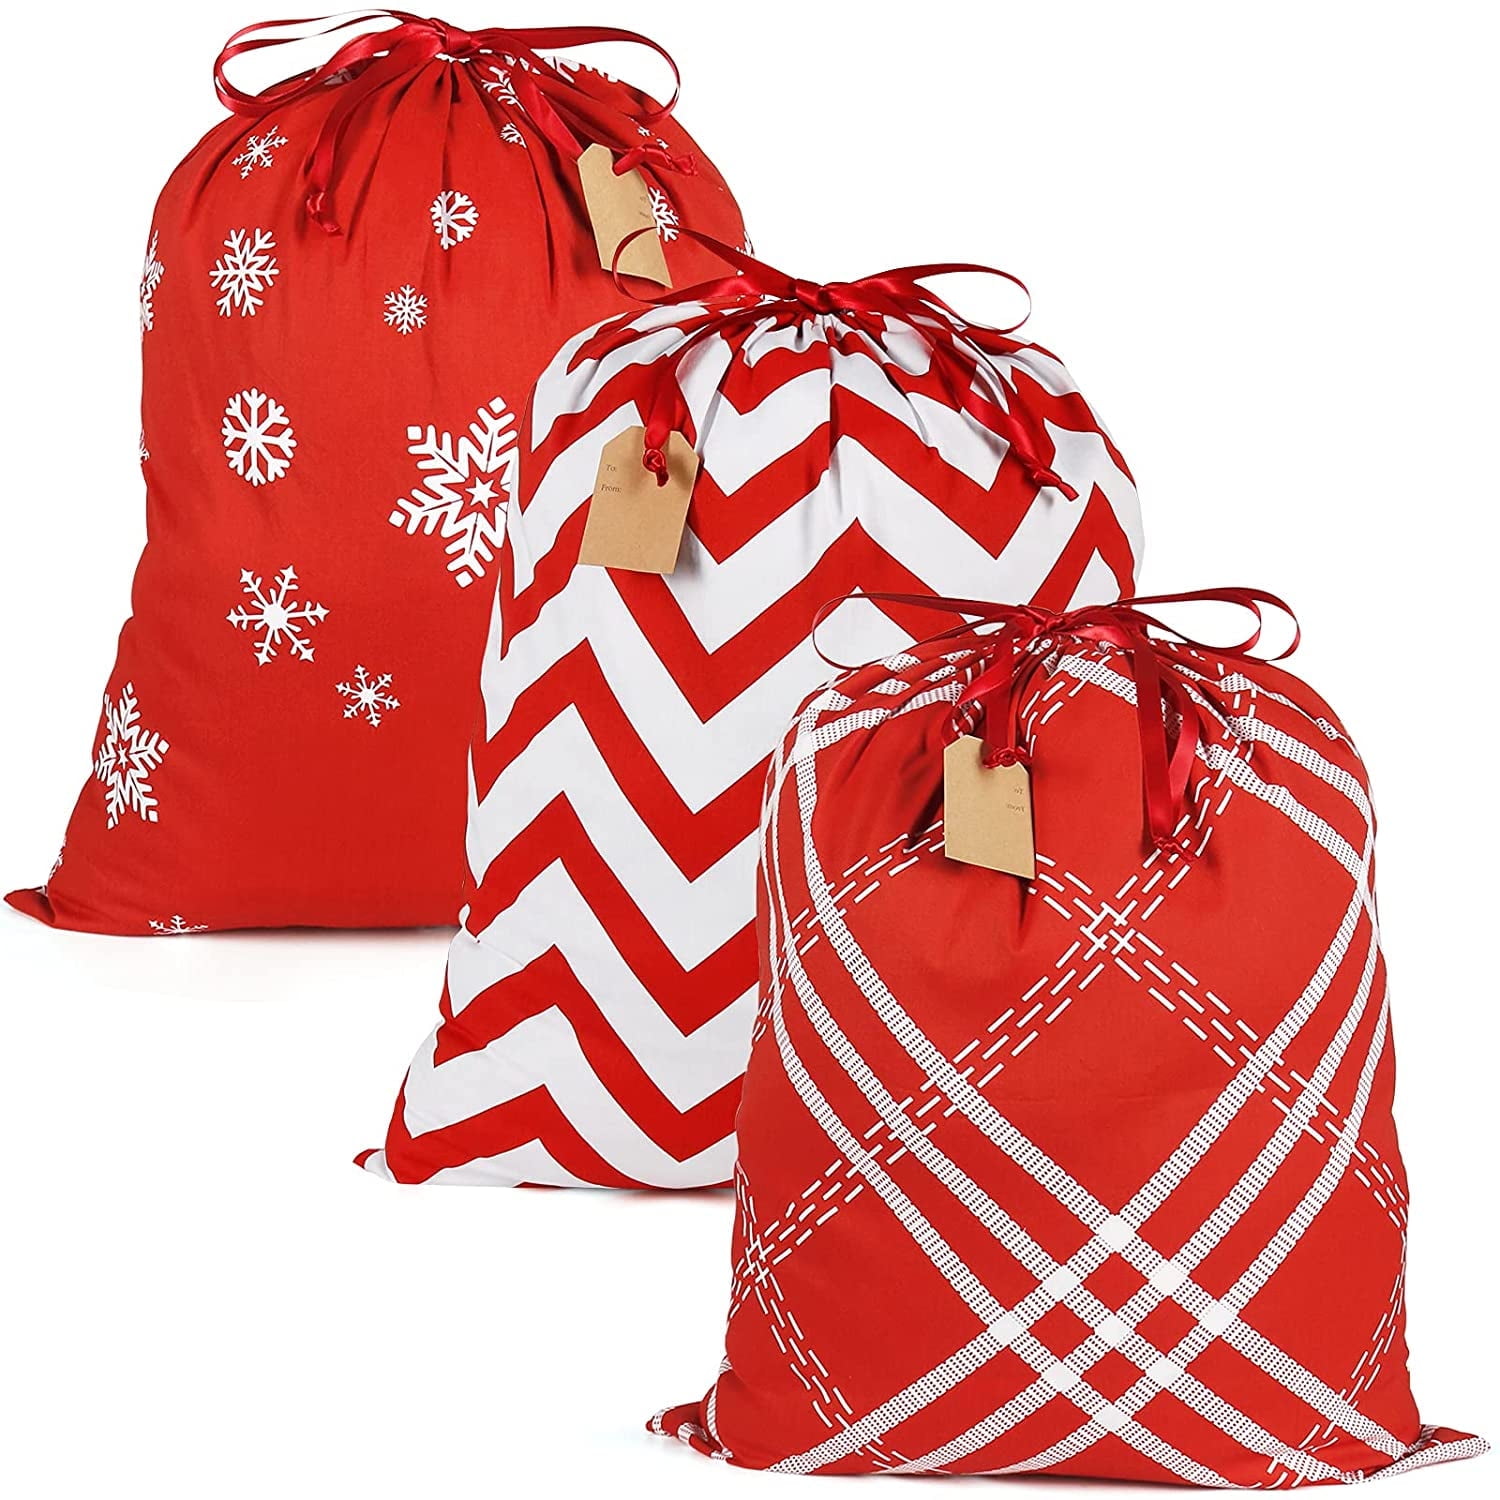 10 Small Christmas Themed Fabric Drawstring Bags, 3x4 Cloth Pouches